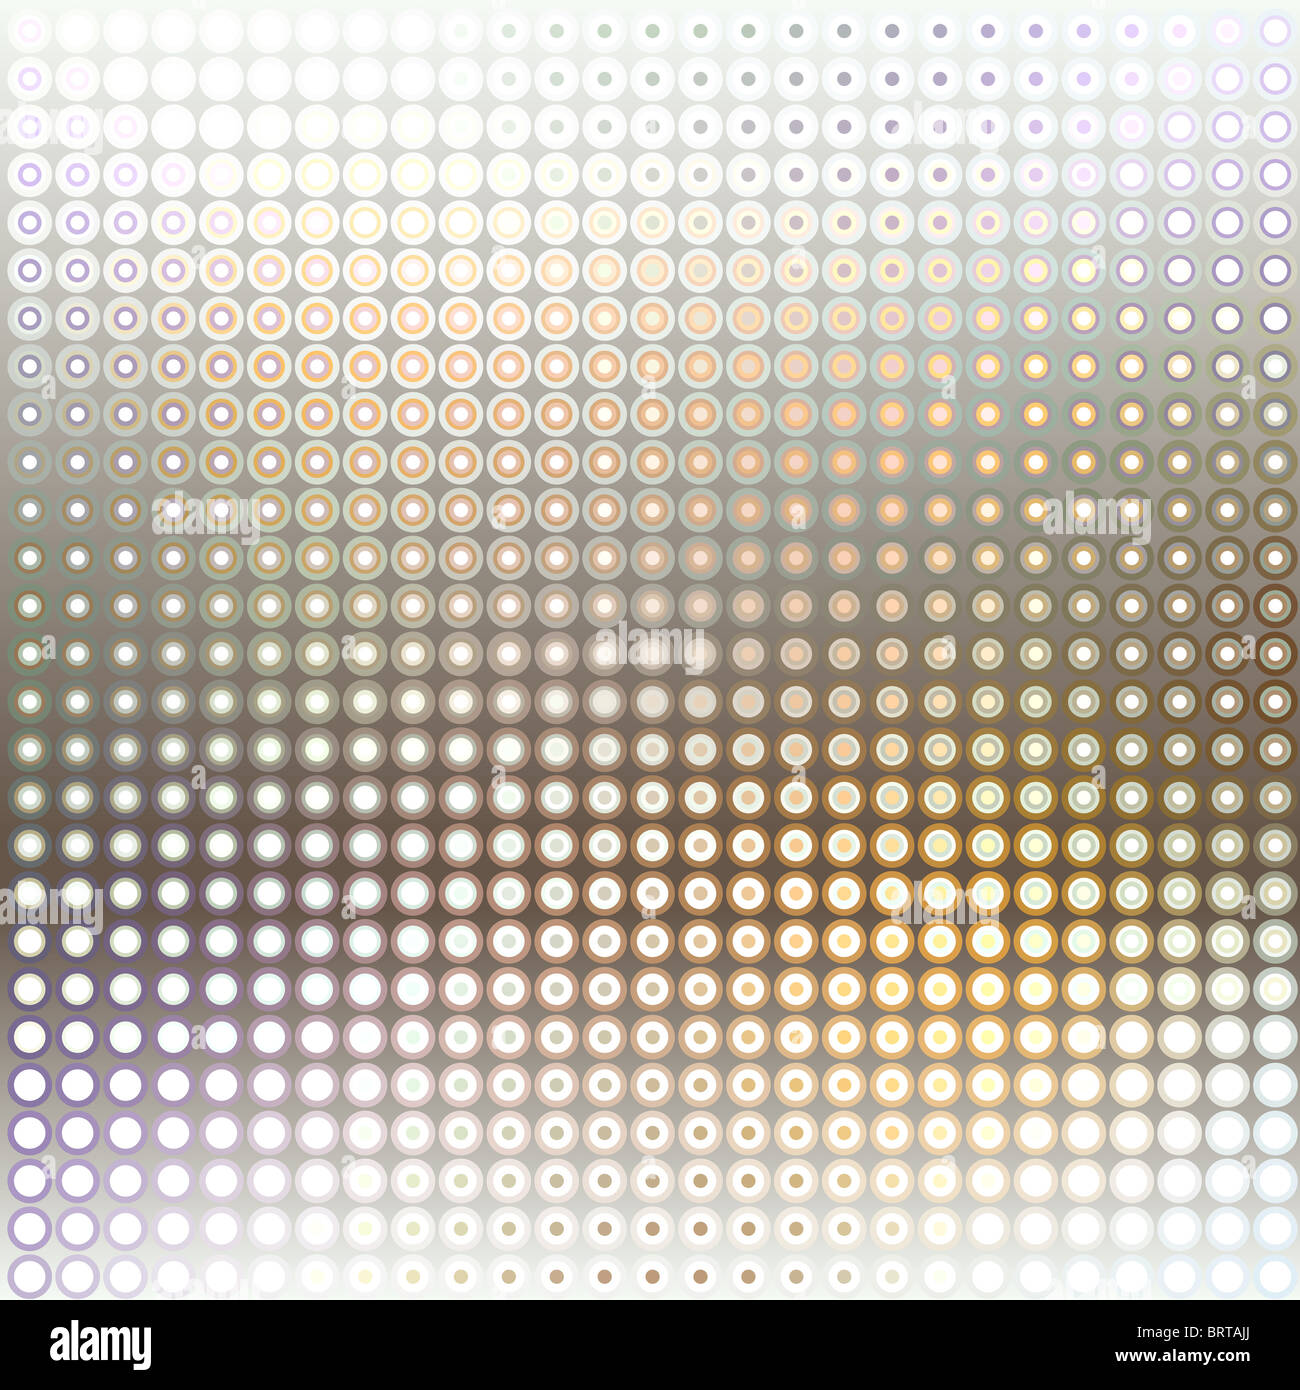 Abstract illustrated background of a dot pattern Stock Photo